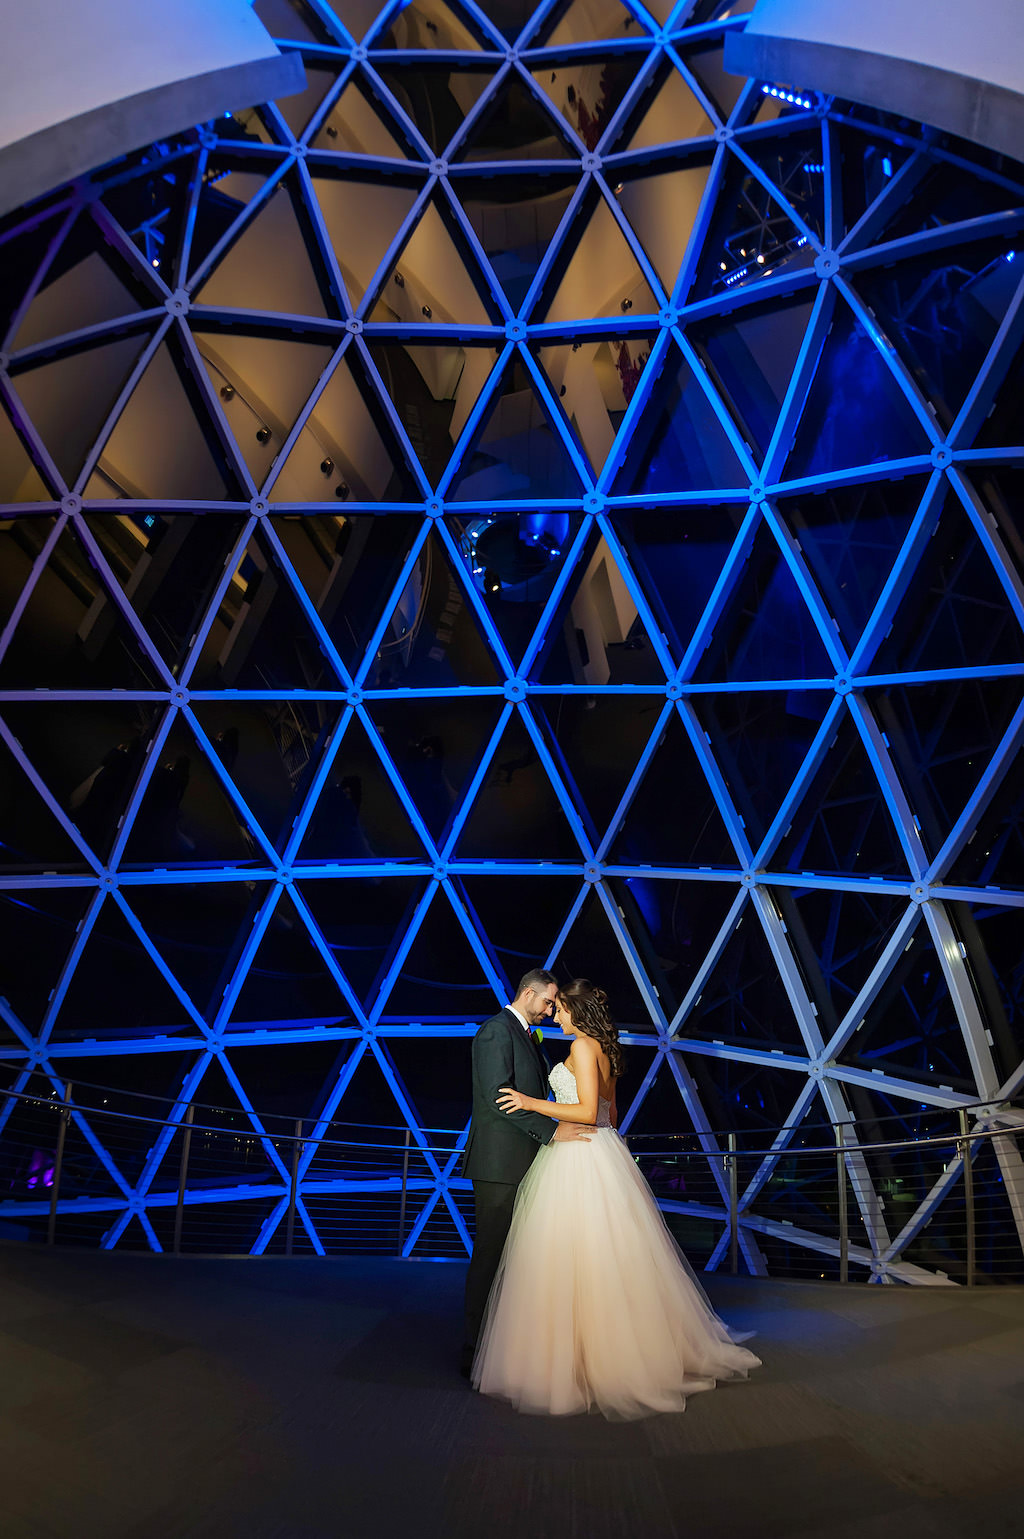 Bride and Groom at Salvador Dali Museum with Triangular Window Backdrop and Blue Uplighting